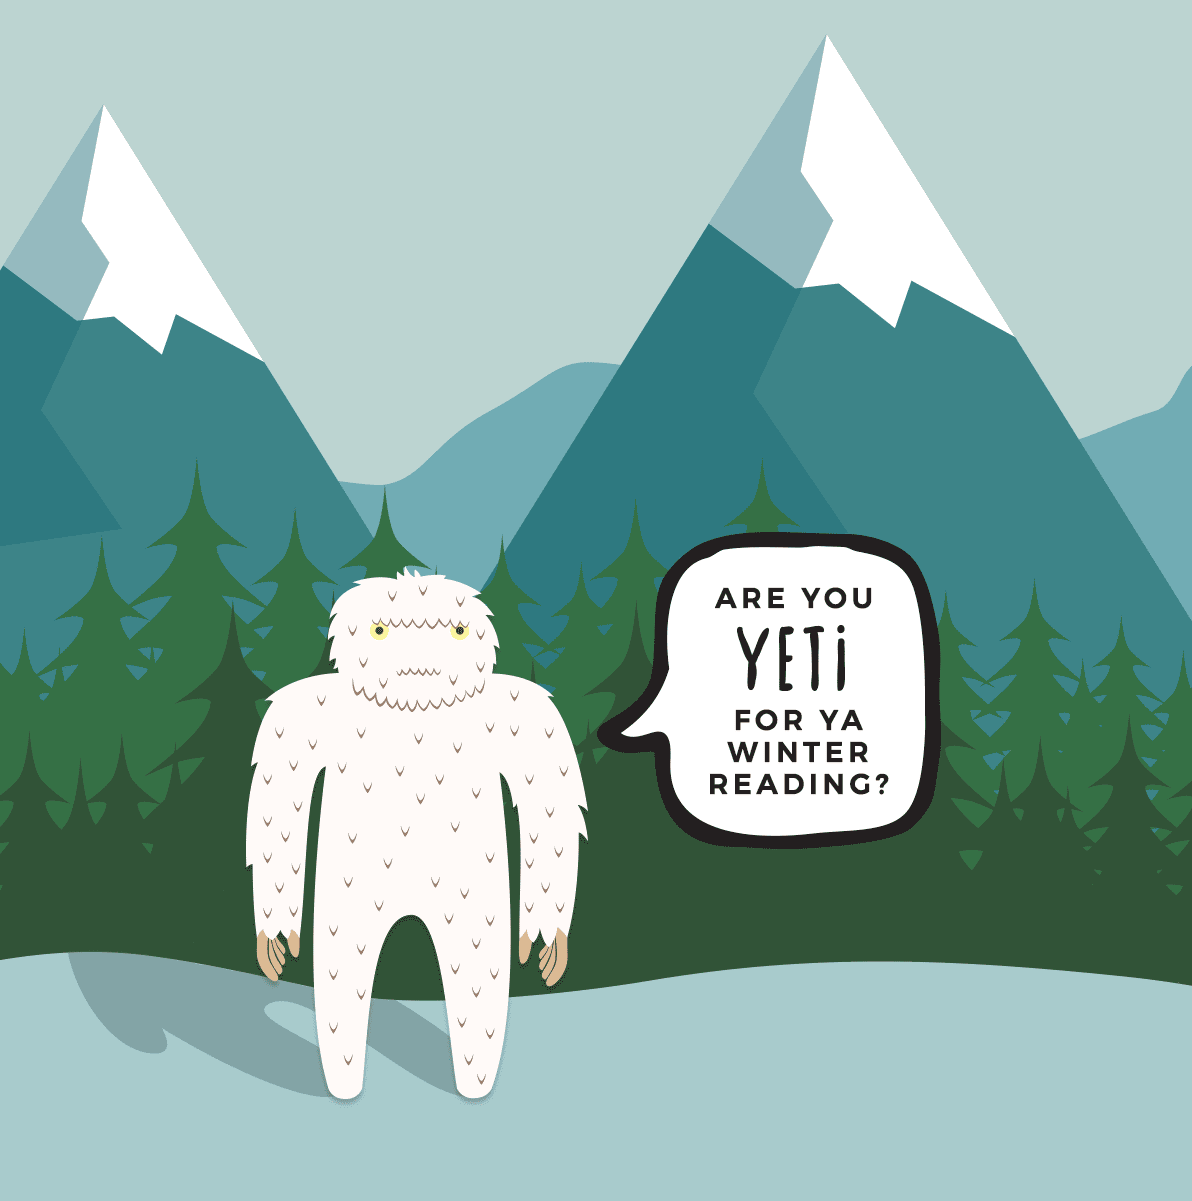 are you yeti for ya winter reading